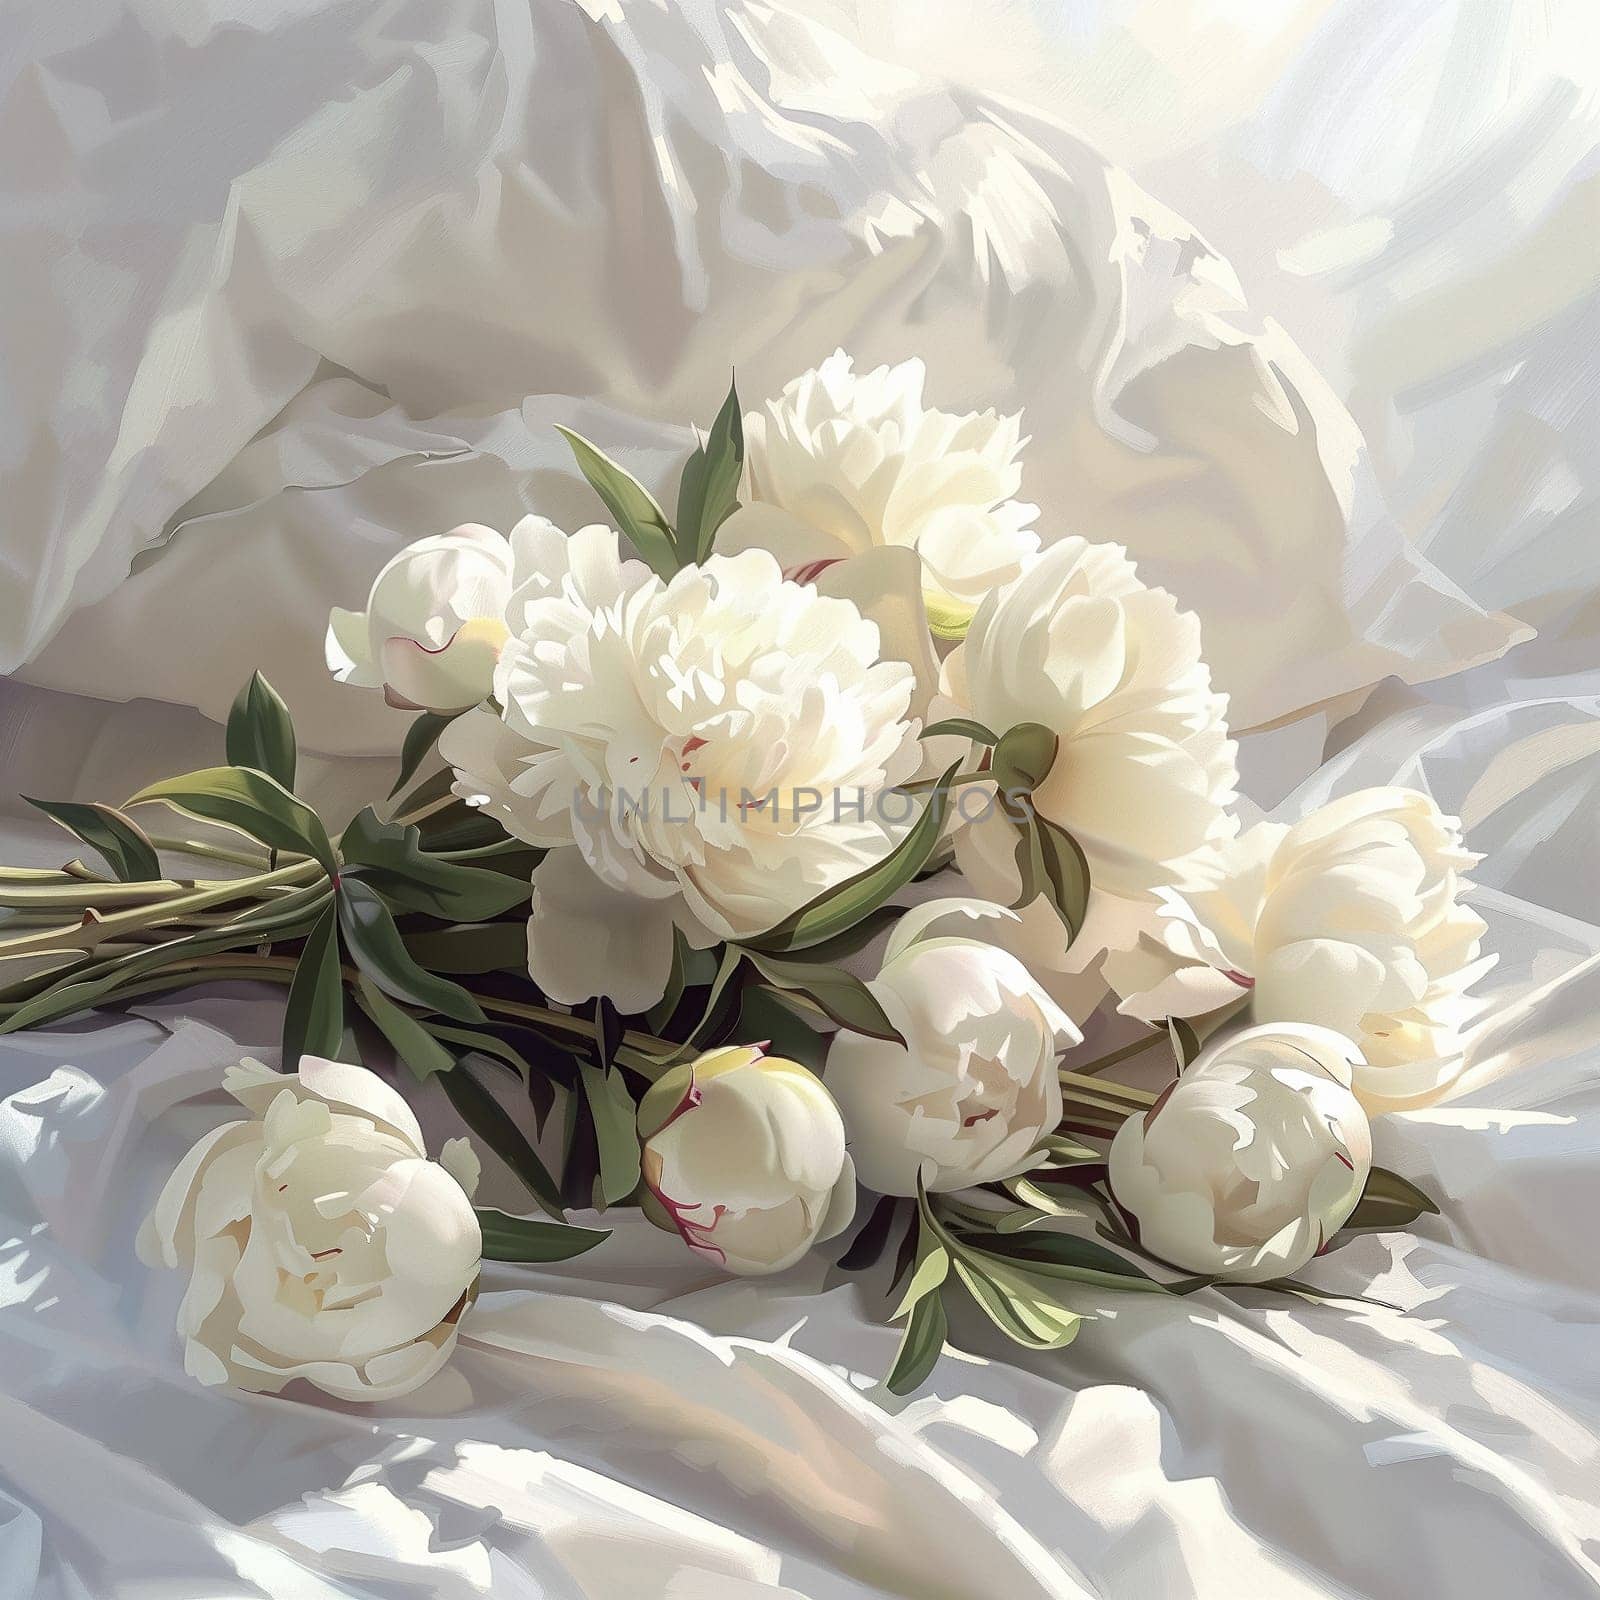 A bouquet of white peonies lying on the bed in the morning. High quality illustration